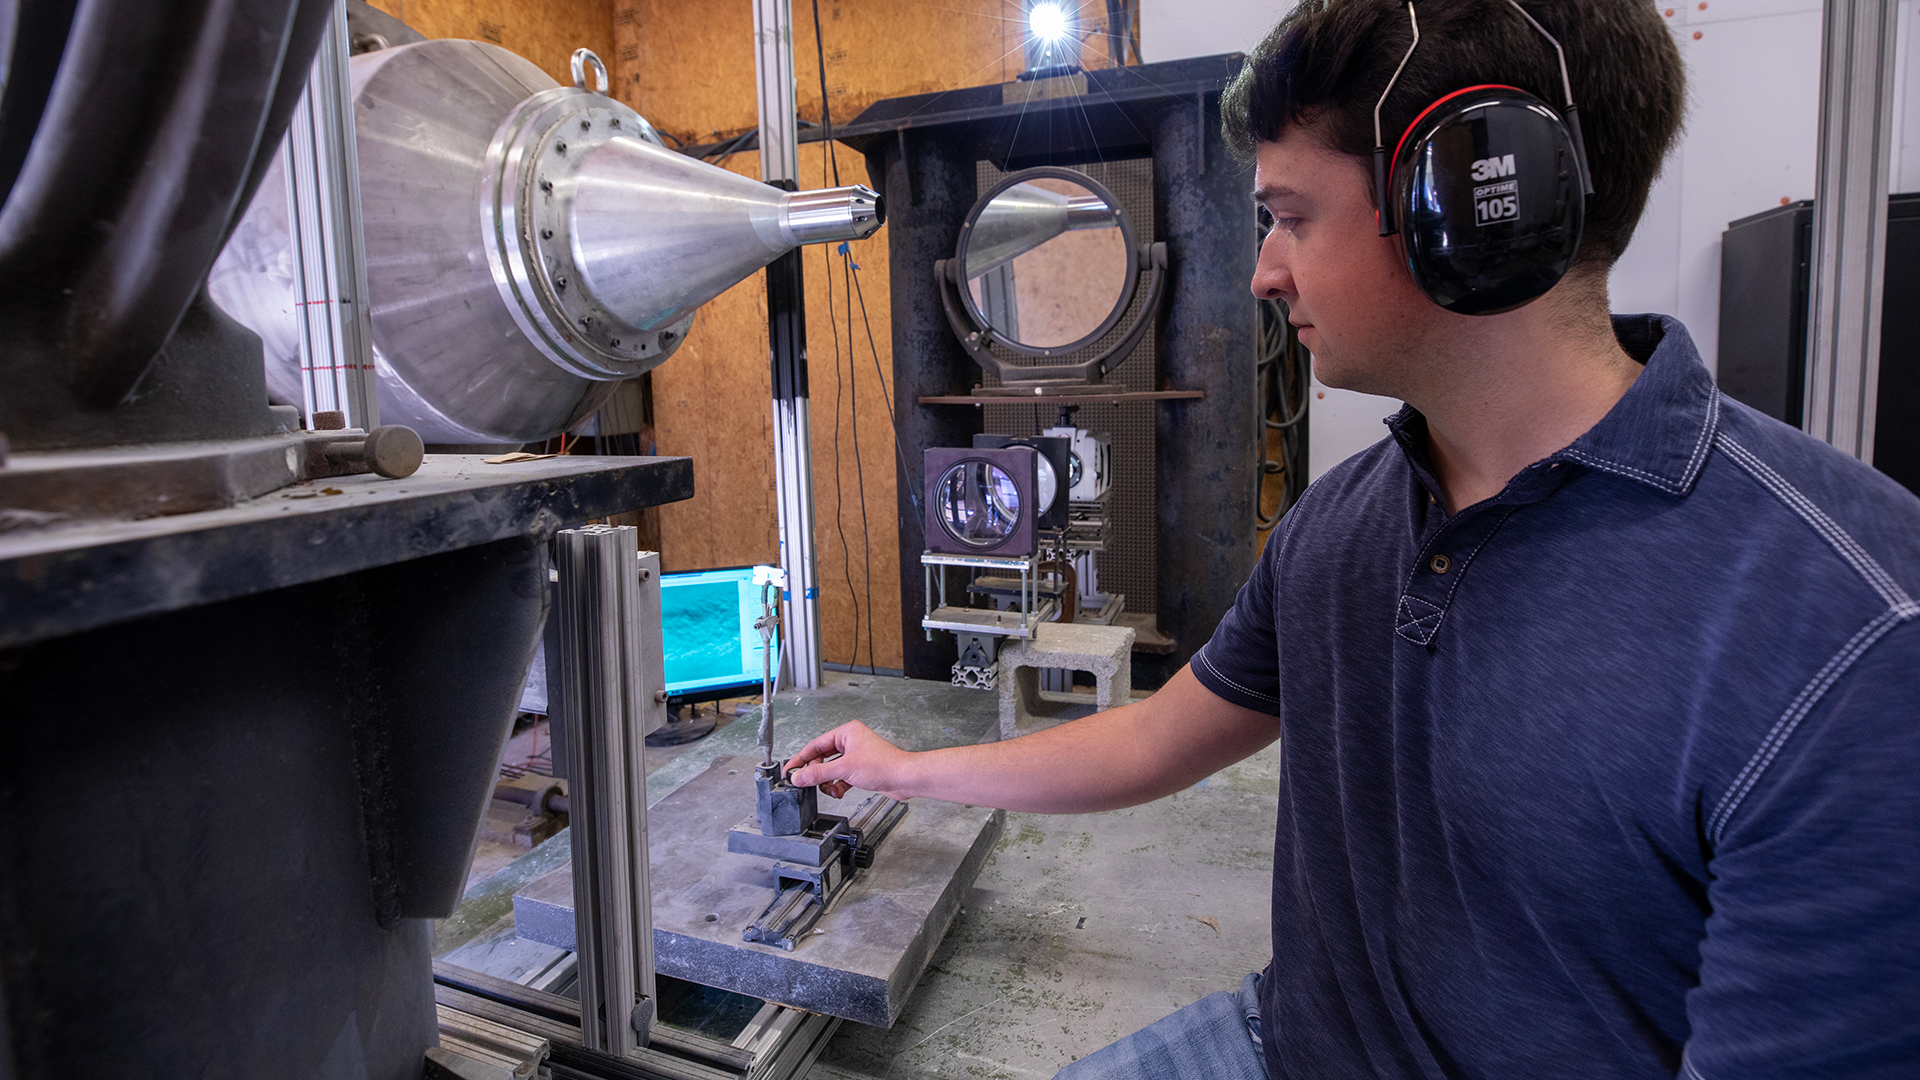 Researcher wearing headphones in testing warehouse facility.